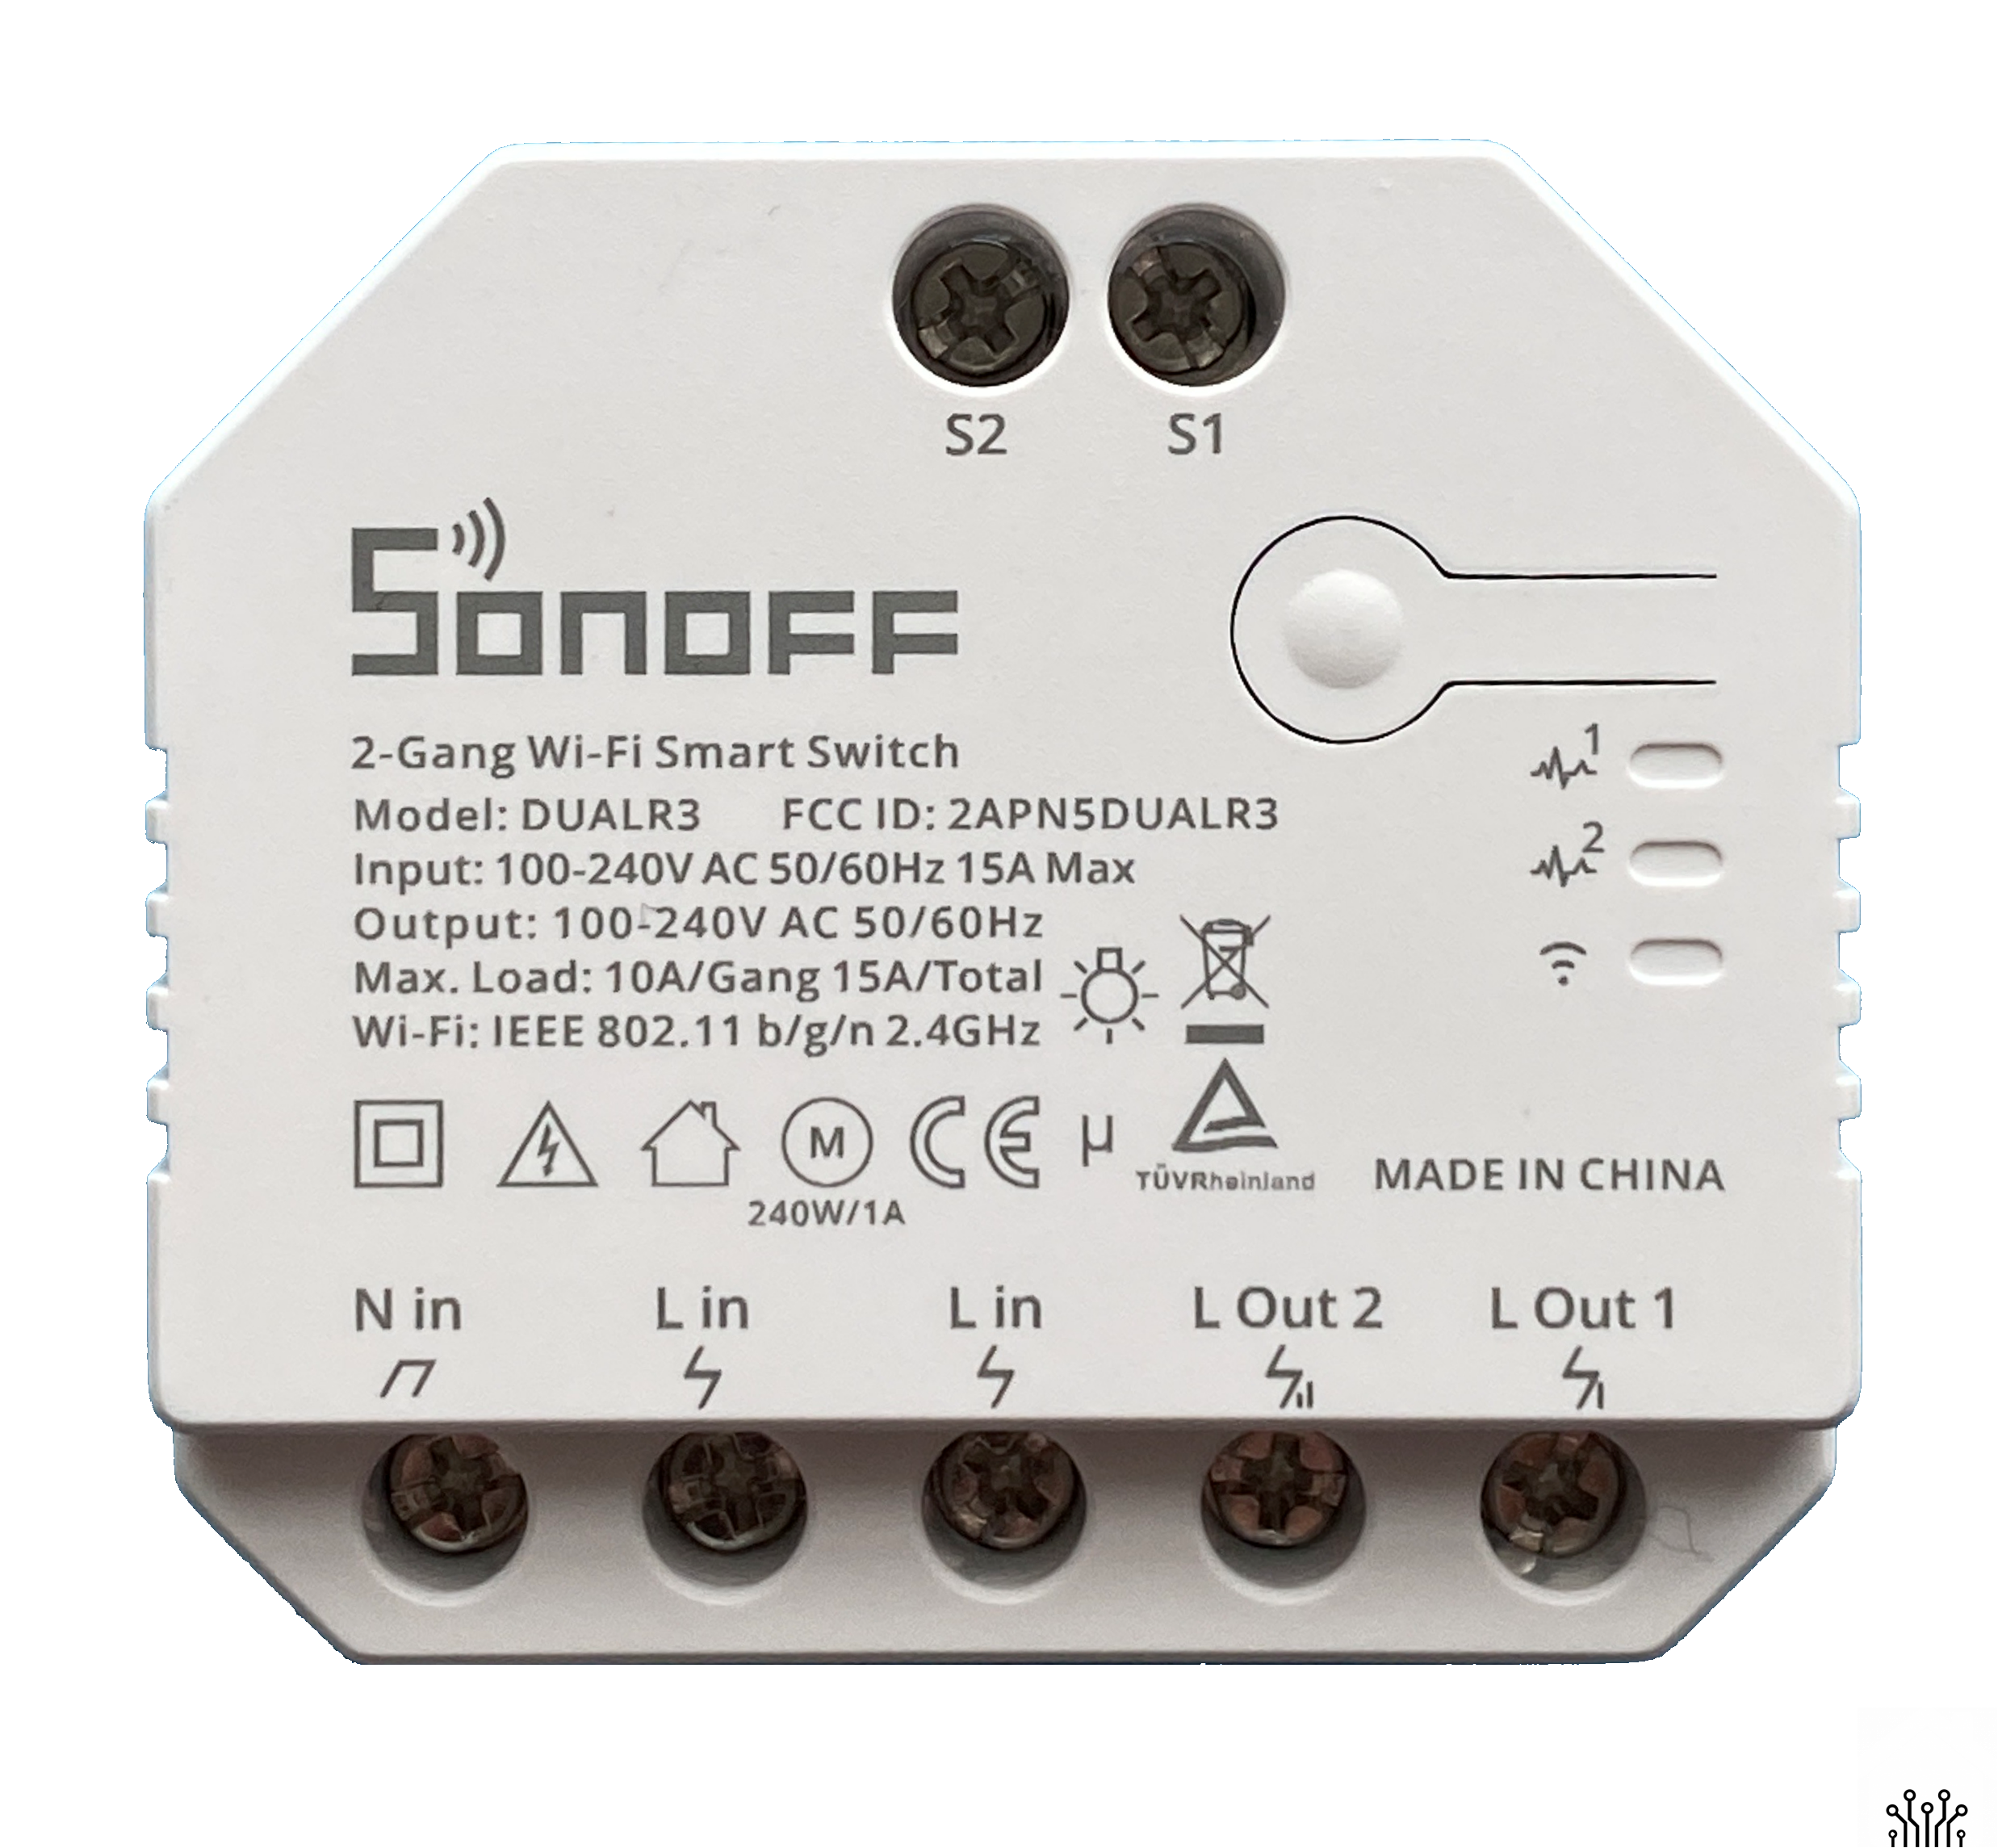 Sonoff Dual (R3) 2-gang WiFi smart relay with power meter an